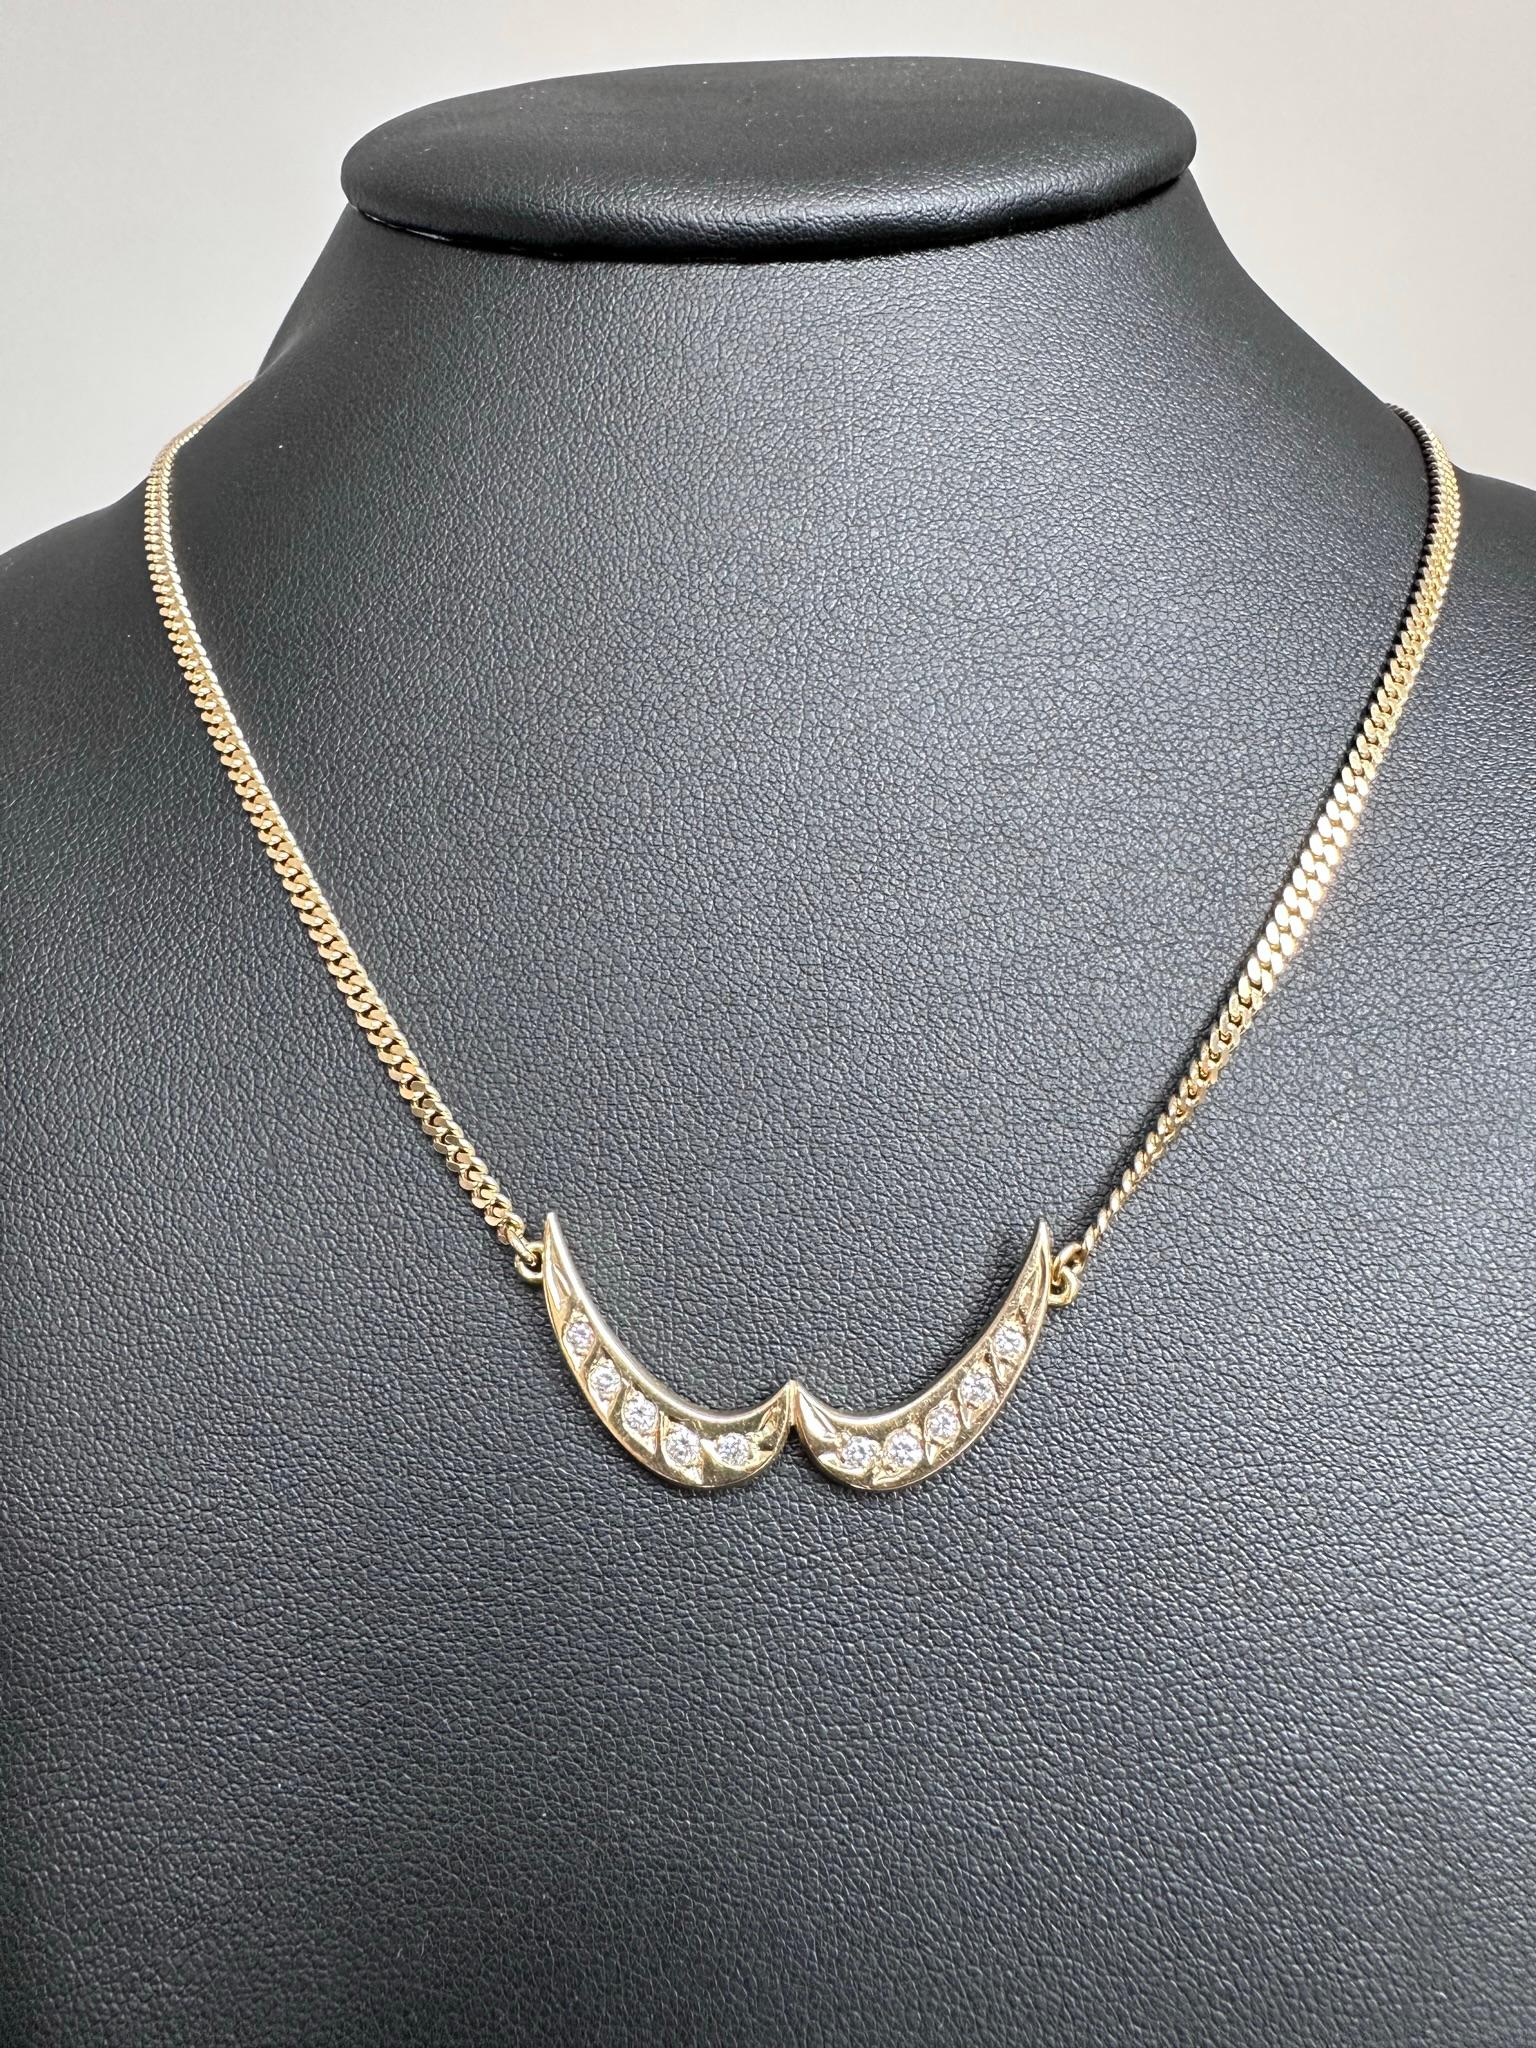 Vintage Collar Shape Necklace 18kt Yellow Gold with Diamonds In Good Condition For Sale In Esch-Sur-Alzette, LU